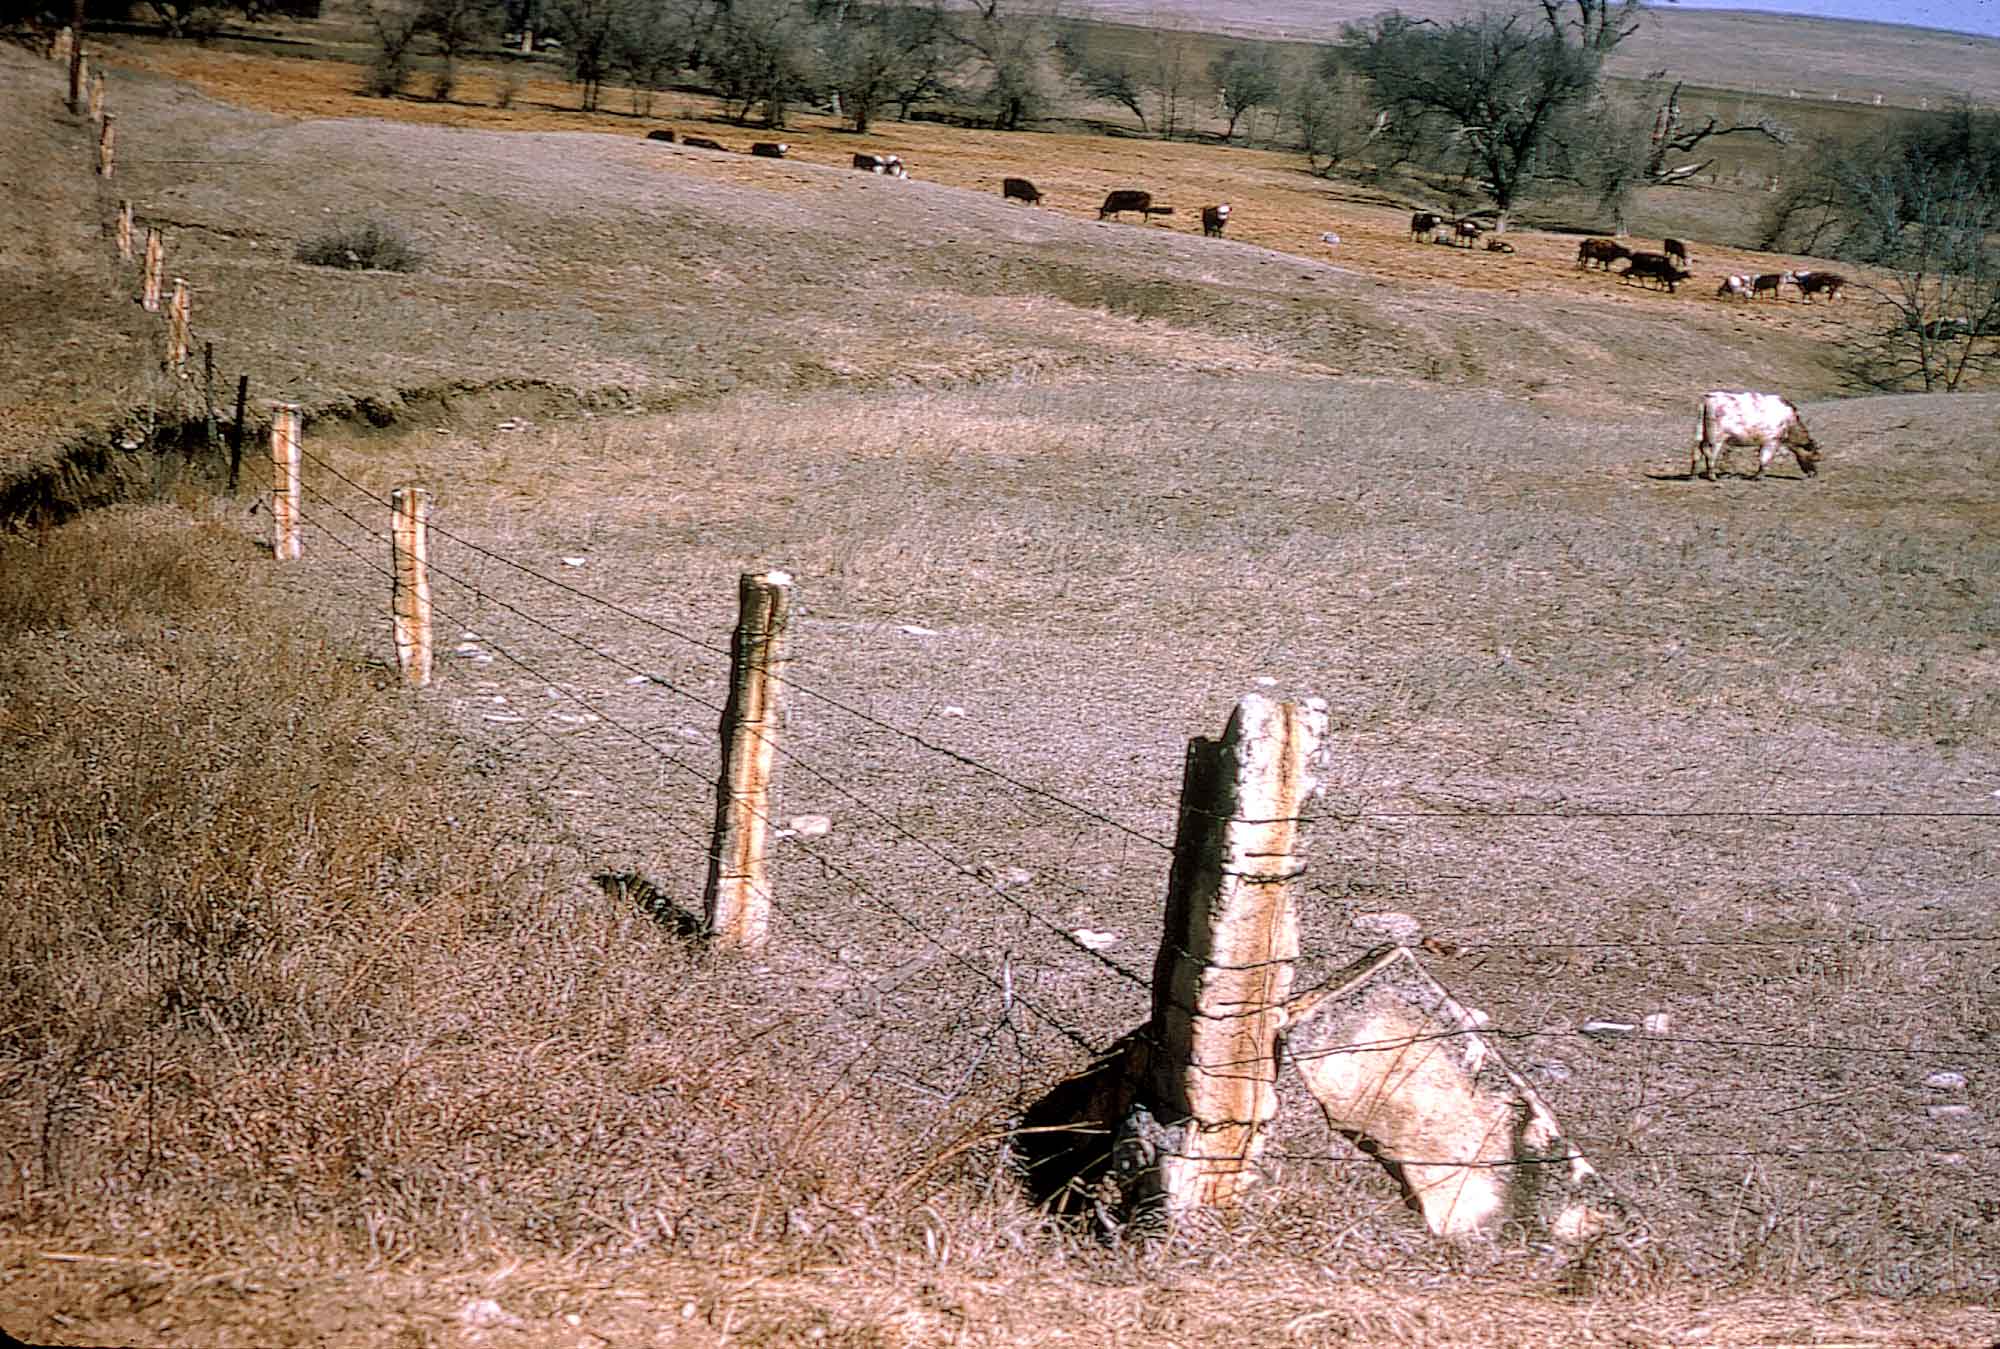 Photographs of cows in a field that is surrounded by a barbed wire fence supported by limestone post rock.